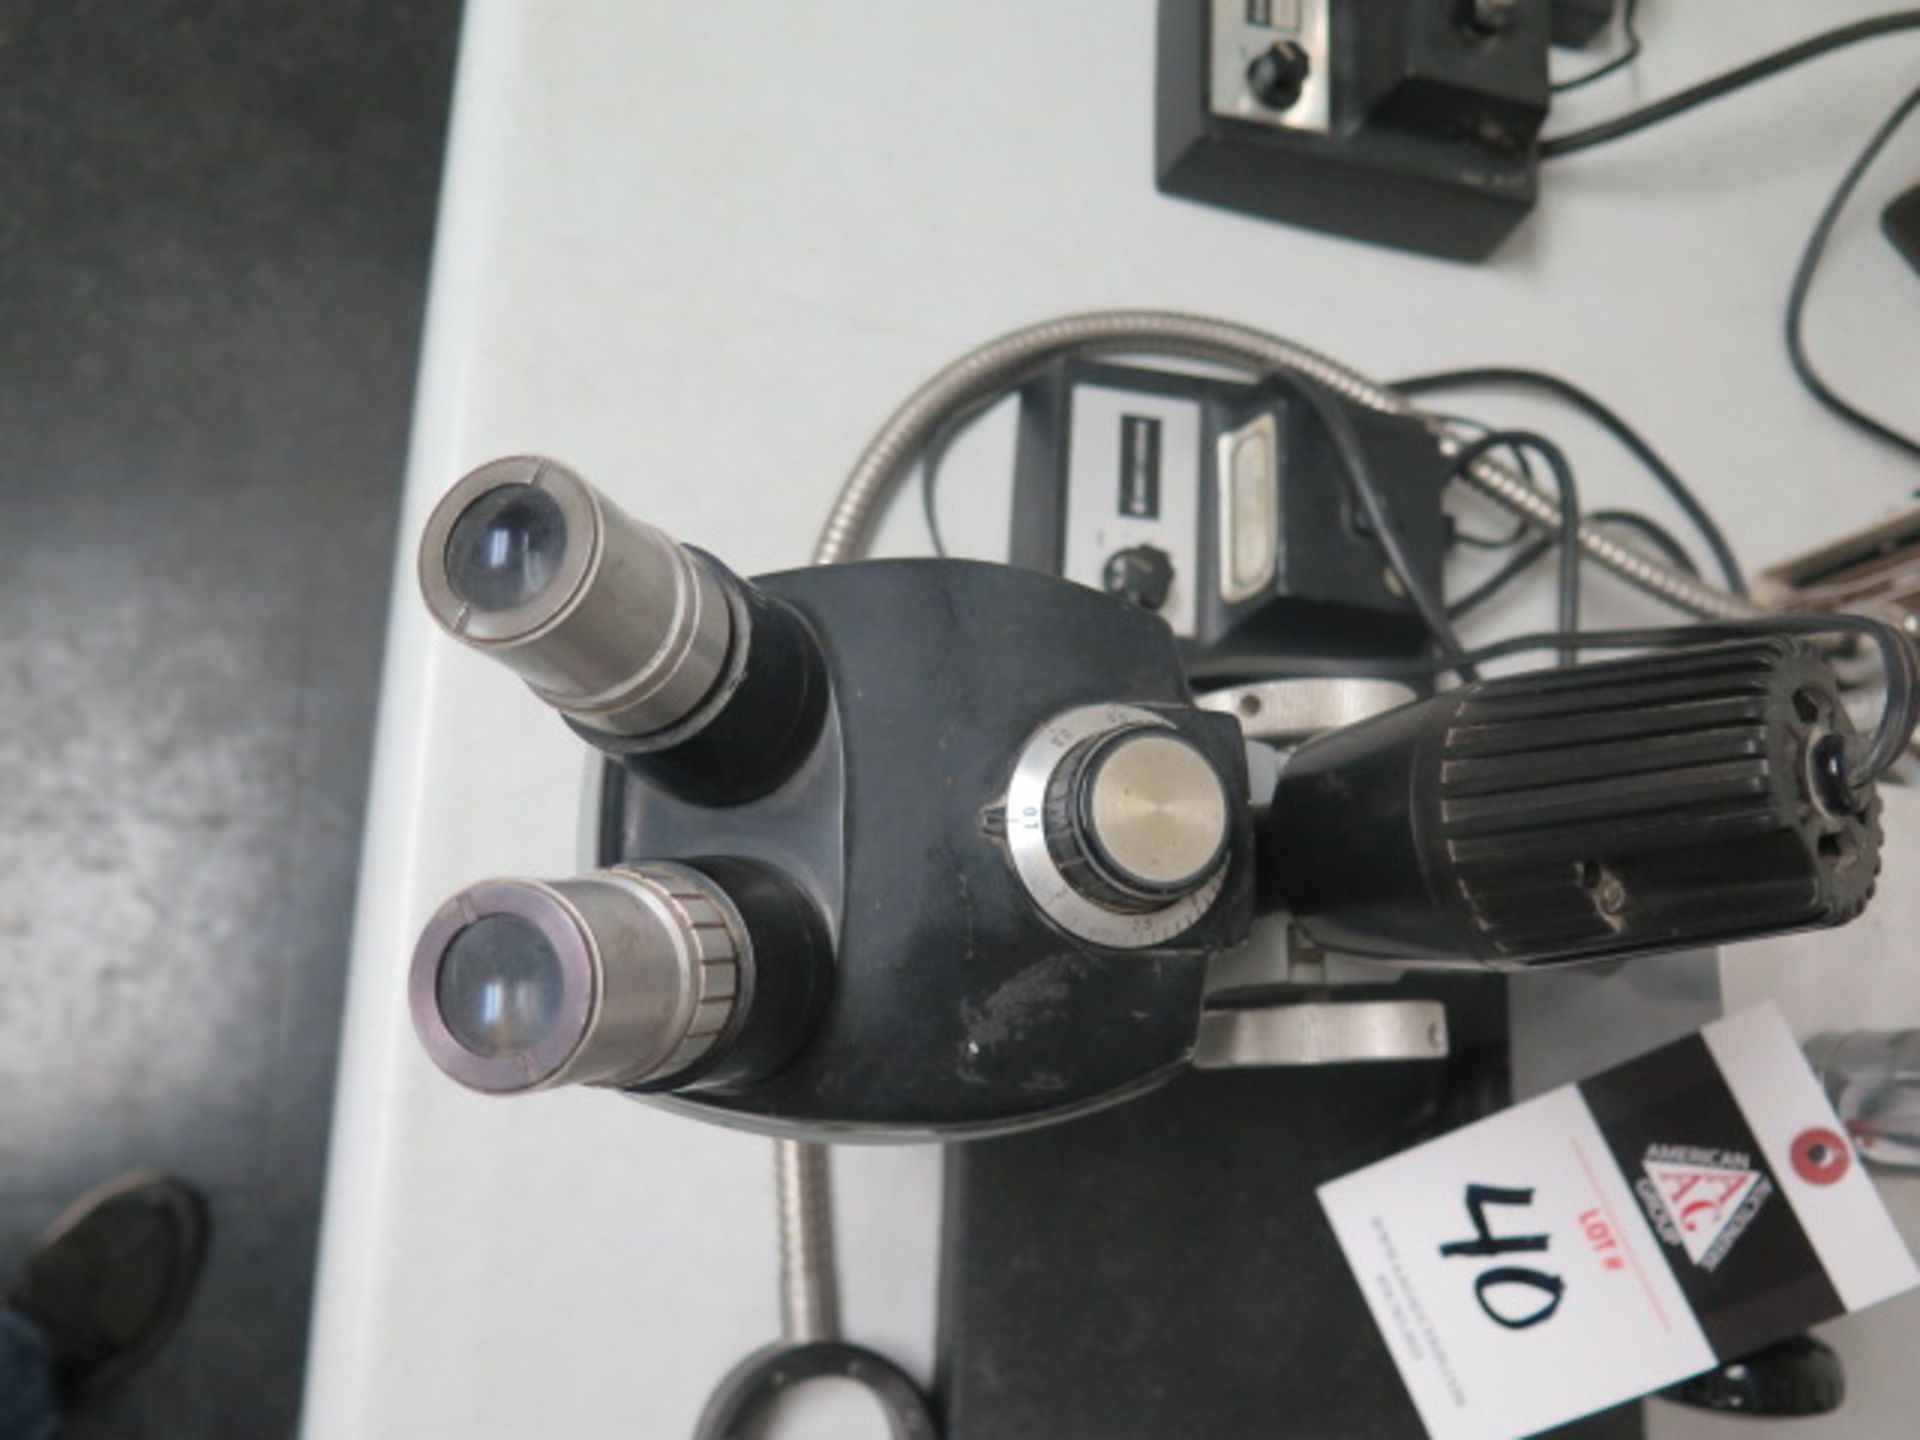 Bausch & Lomb Stereo Microscope w/ Light Source (SOLD AS-IS - NO WARRANTY) - Image 6 of 9